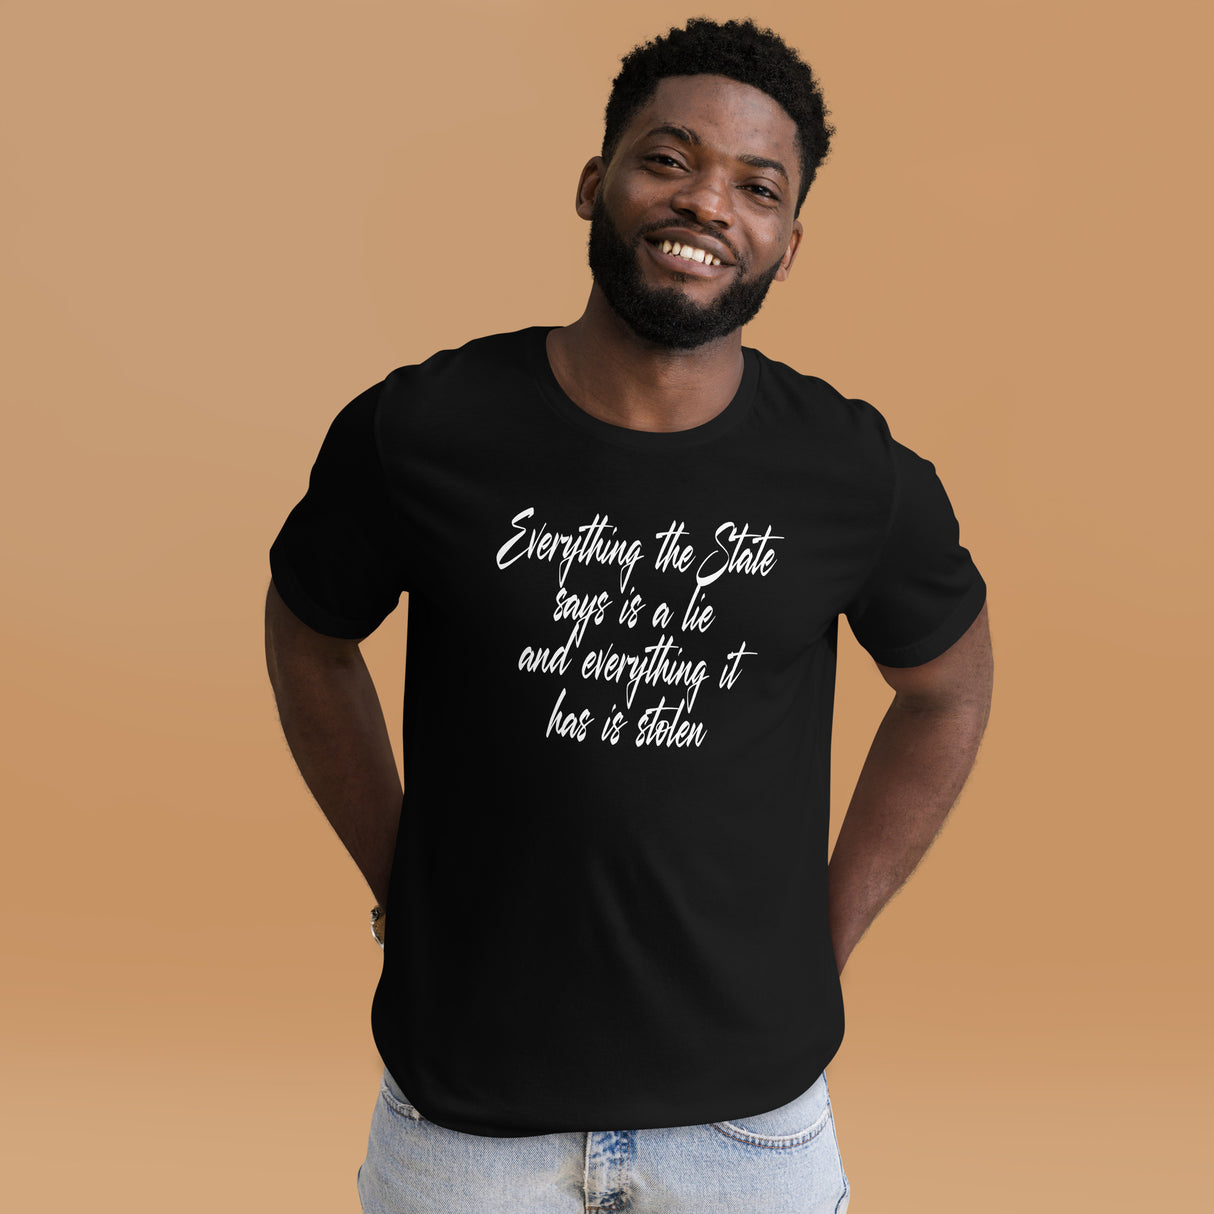 Everything The State Says is a Lie Men's Shirt